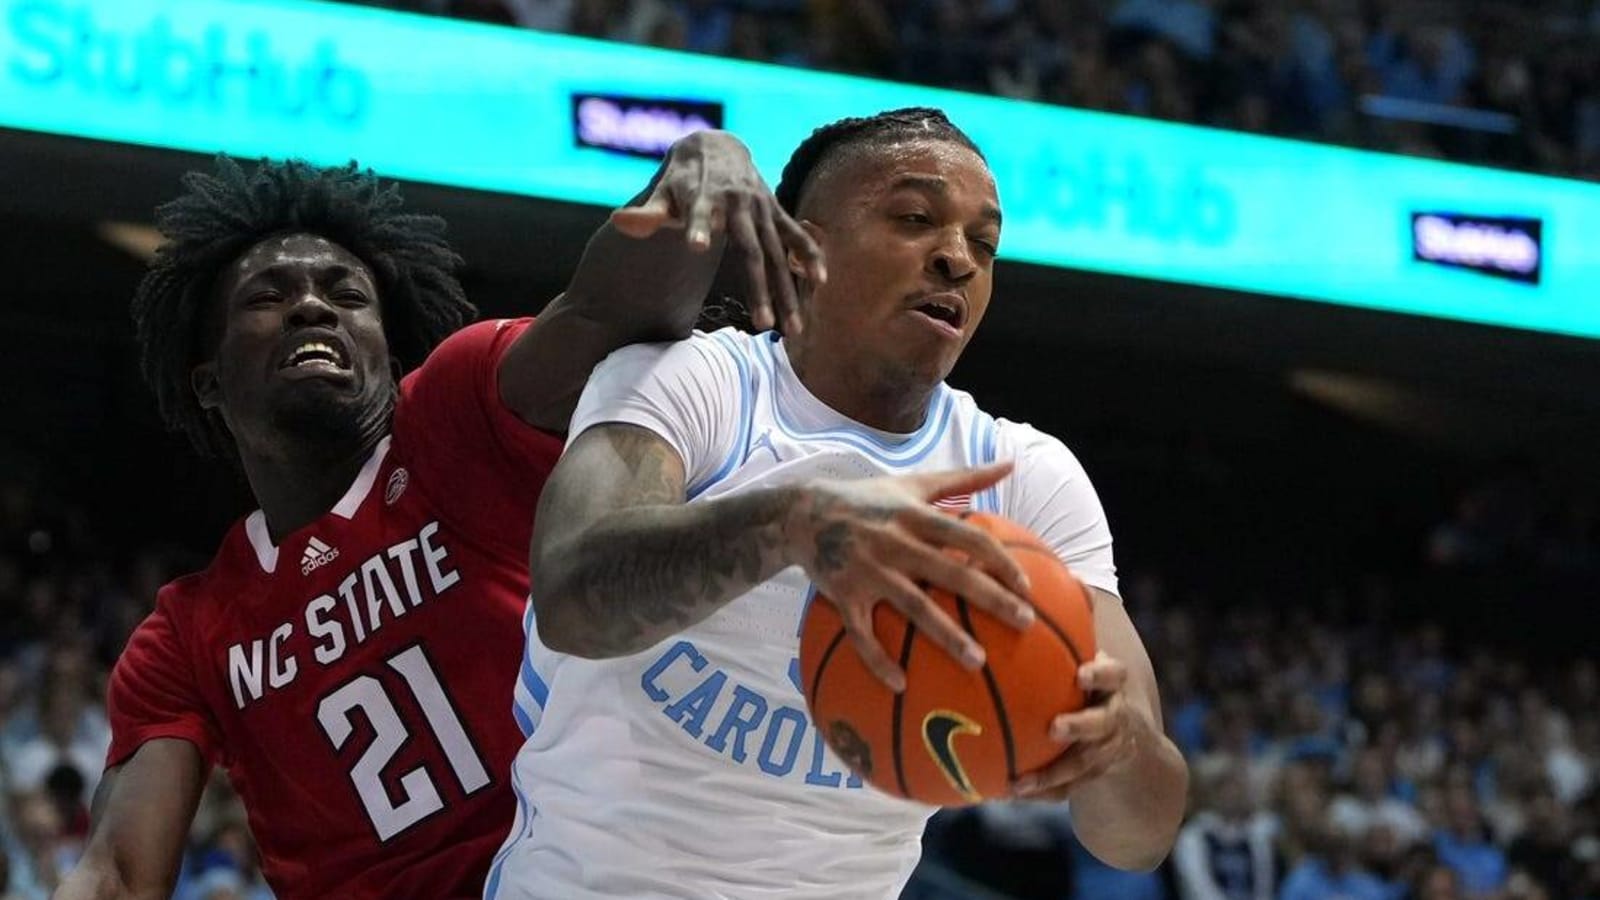 UNC, Duke unranked, but rivalry still matters to both teams, fans